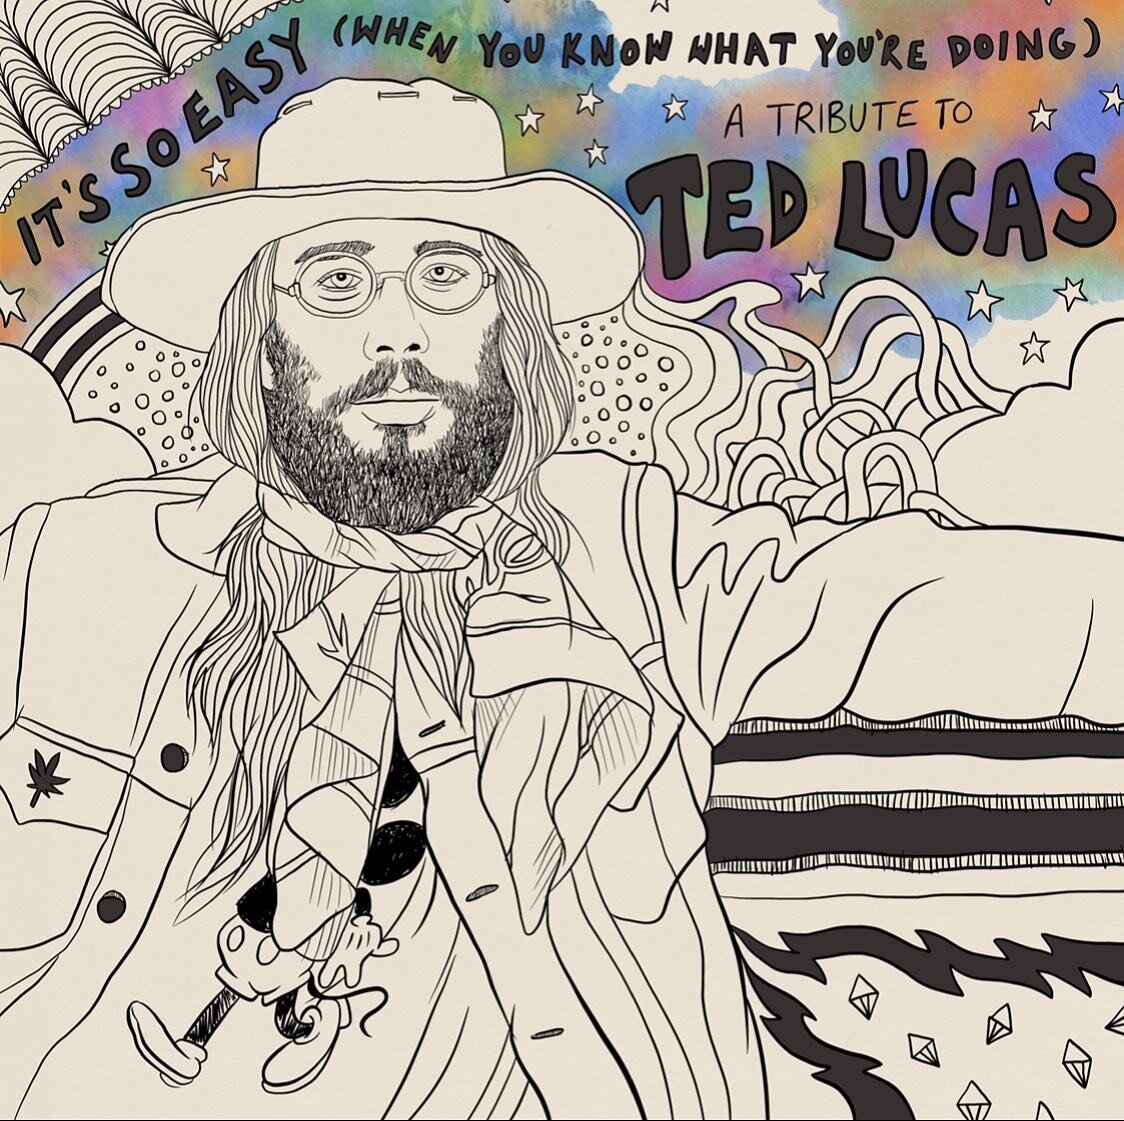 The plain sane and simple music of Ted Lucas has saved me on numerous occasions for many years, so it was a true honor to scribble the album art for this beautiful homage: &lsquo;It&rsquo;s So Easy (When You Know What You&rsquo;re Doing) A Tribute To